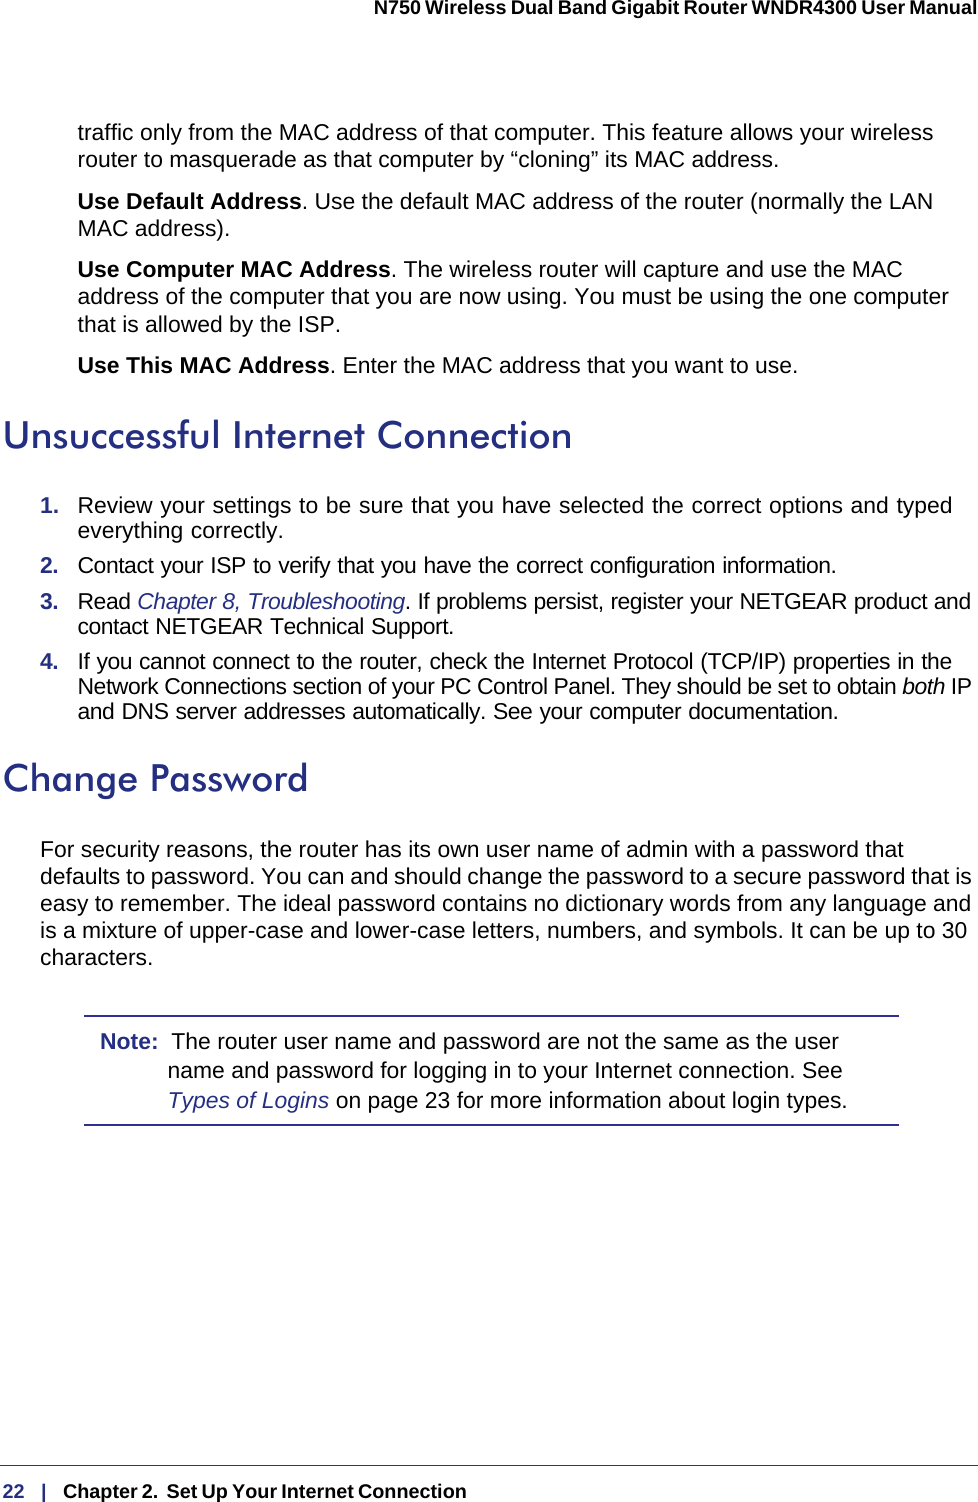 22   |   Chapter 2.  Set Up Your Internet Connection  N750 Wireless Dual Band Gigabit Router WNDR4300 User Manual traffic only from the MAC address of that computer. This feature allows your wireless router to masquerade as that computer by “cloning” its MAC address. Use Default Address. Use the default MAC address of the router (normally the LAN MAC address).Use Computer MAC Address. The wireless router will capture and use the MAC address of the computer that you are now using. You must be using the one computer that is allowed by the ISP.Use This MAC Address. Enter the MAC address that you want to use.Unsuccessful Internet Connection1.  Review your settings to be sure that you have selected the correct options and typed everything correctly. 2.  Contact your ISP to verify that you have the correct configuration information.3.  Read Chapter 8, Troubleshooting. If problems persist, register your NETGEAR product and contact NETGEAR Technical Support.4.  If you cannot connect to the router, check the Internet Protocol (TCP/IP) properties in the Network Connections section of your PC Control Panel. They should be set to obtain both IP and DNS server addresses automatically. See your computer documentation.Change PasswordFor security reasons, the router has its own user name of admin with a password that defaults to password. You can and should change the password to a secure password that is easy to remember. The ideal password contains no dictionary words from any language and is a mixture of upper-case and lower-case letters, numbers, and symbols. It can be up to 30 characters.Note:  The router user name and password are not the same as the user name and password for logging in to your Internet connection. See Types of Logins on page  23 for more information about login types.